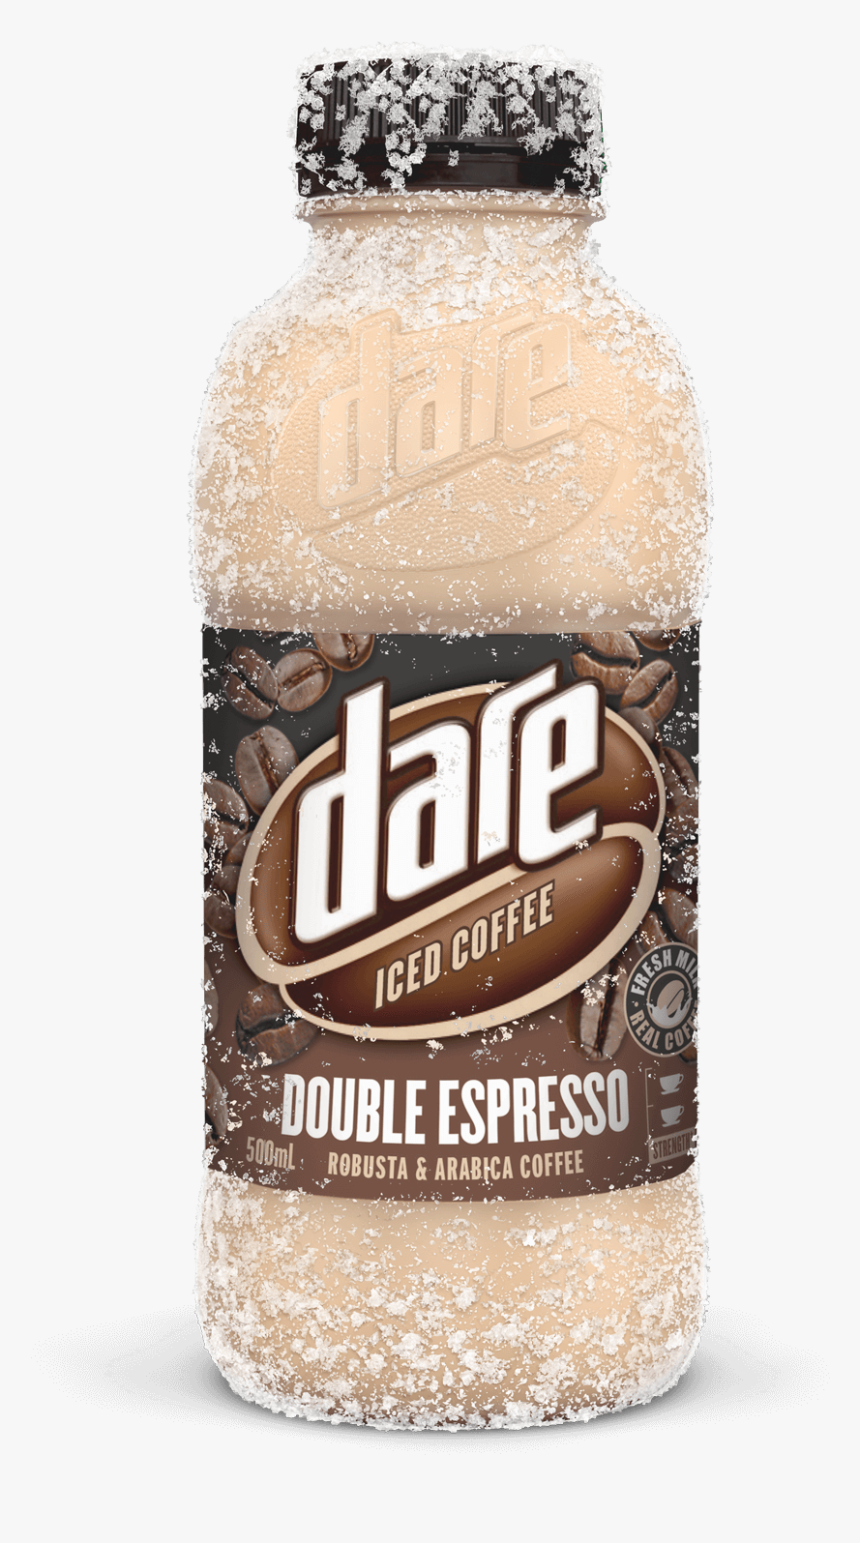 Dare Iced Coffee Double Espresso, HD Png Download, Free Download